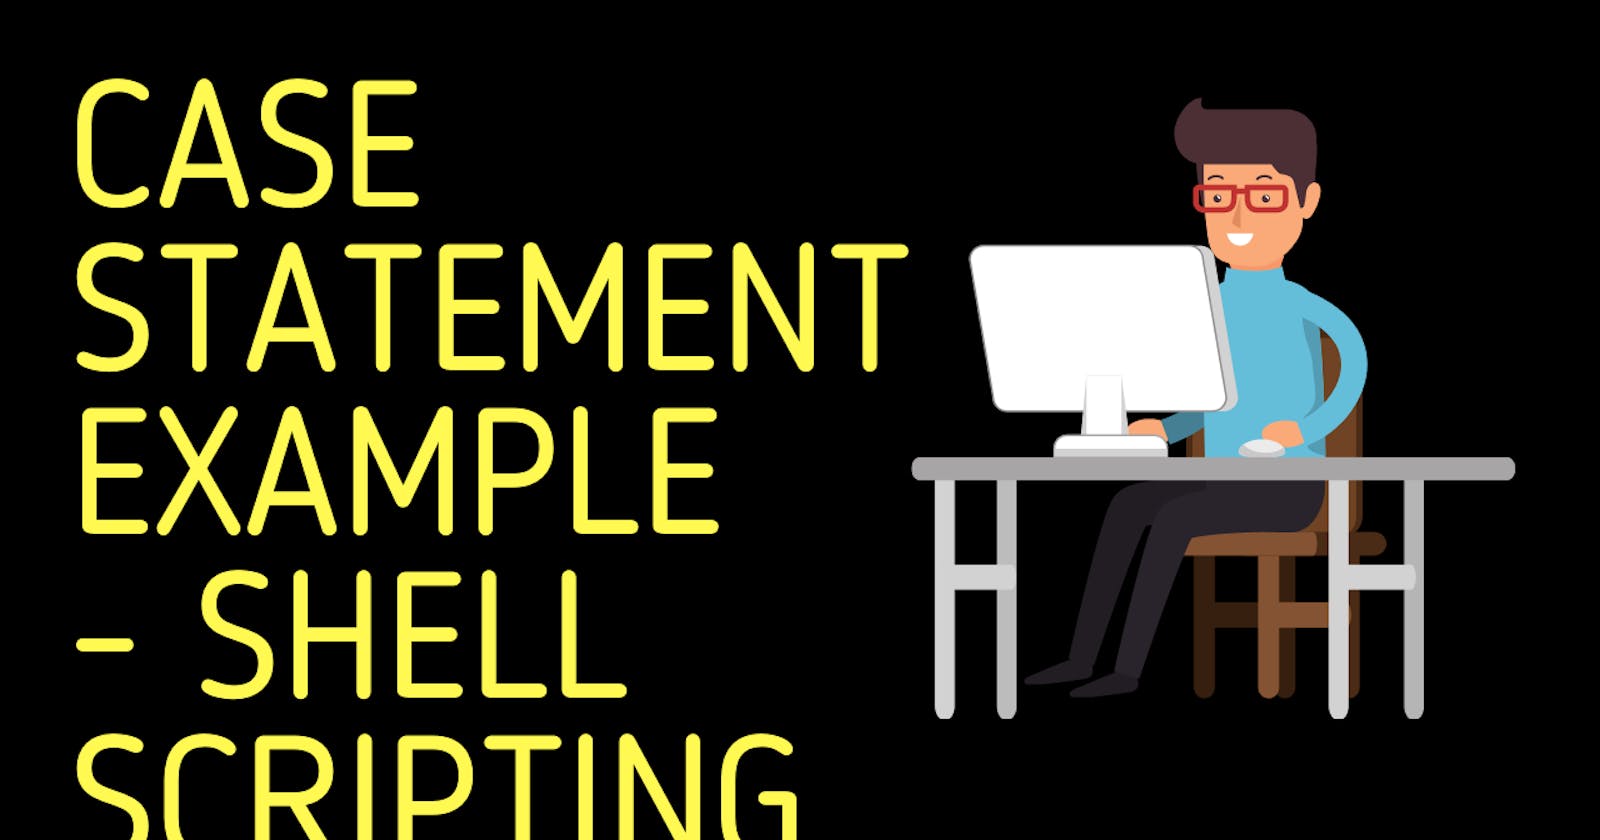 Case Statement Example | Shell Scripting